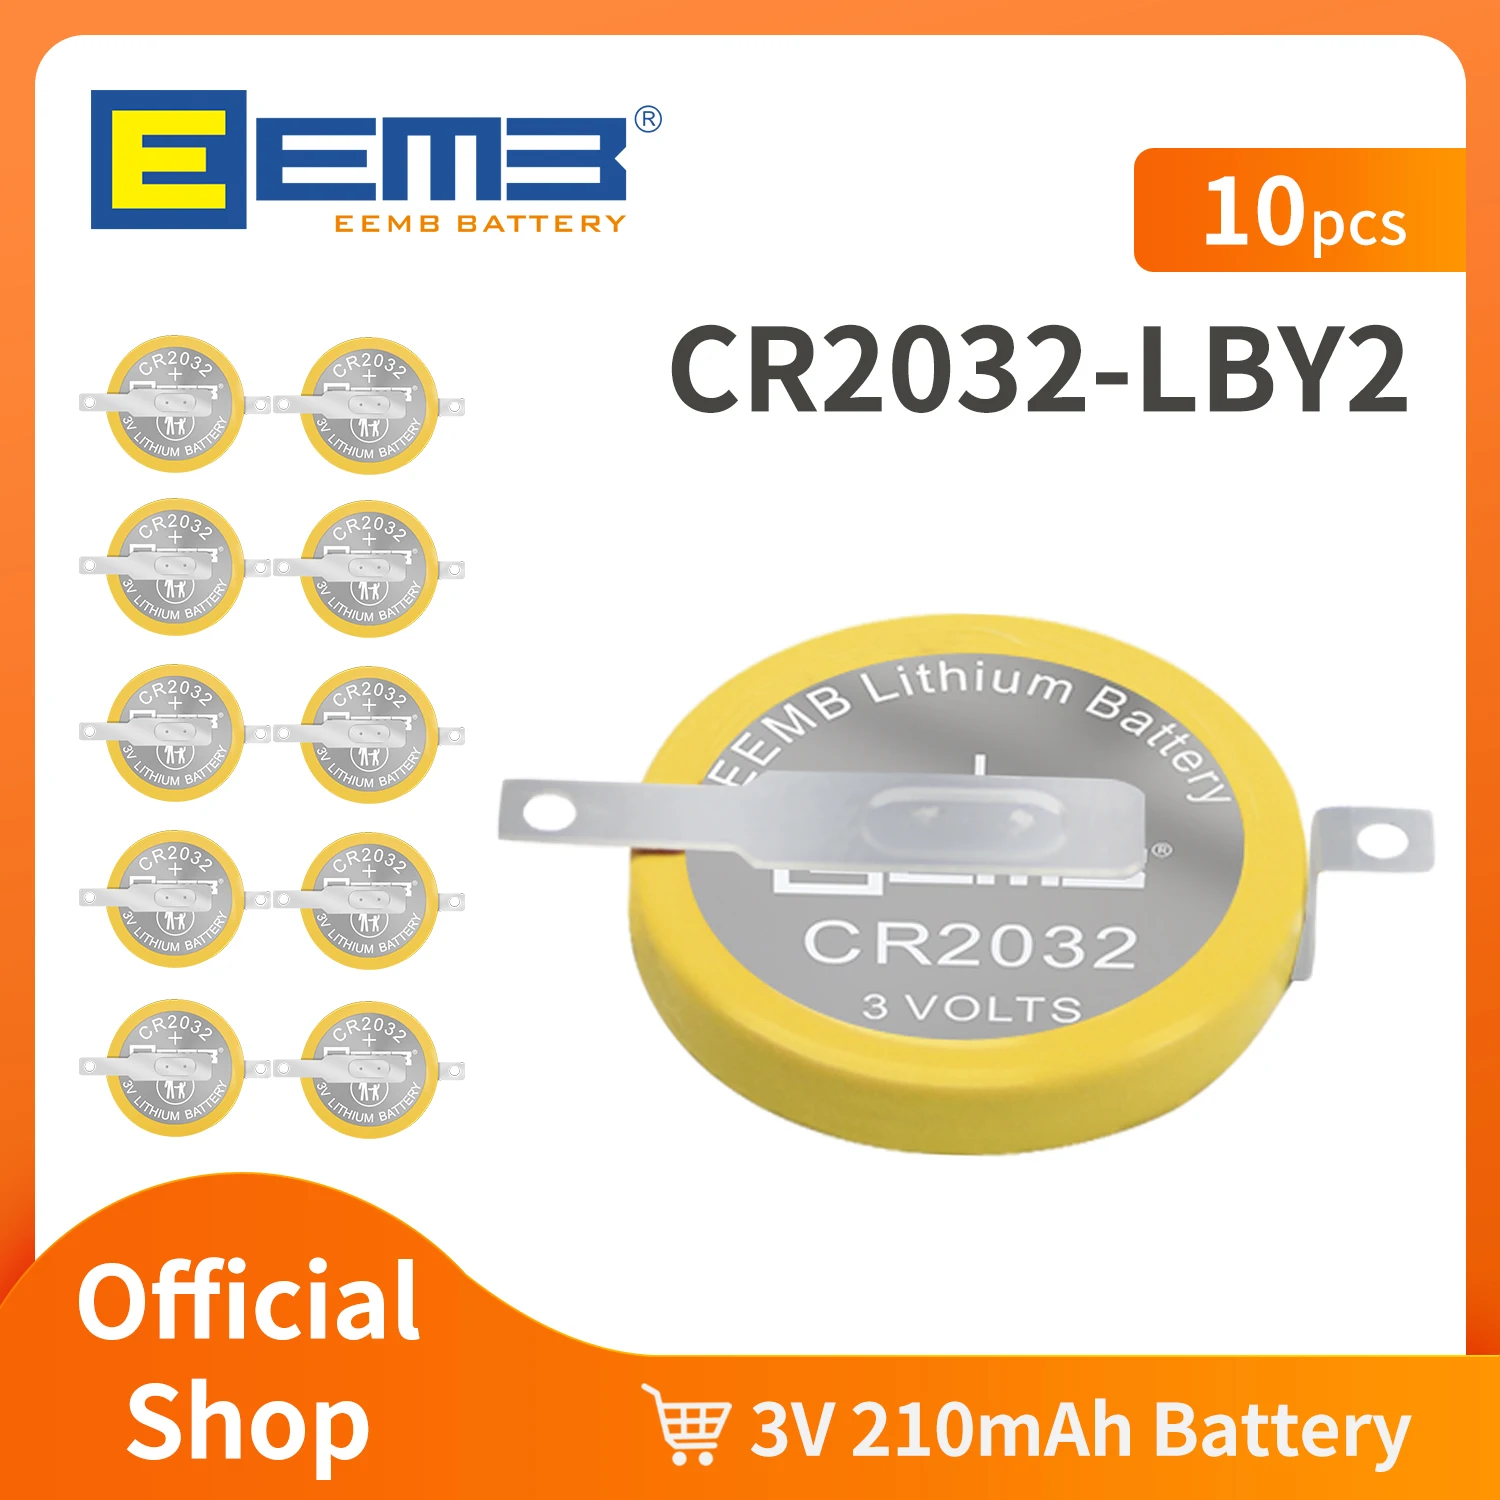 EEMB 10PCS CR2032 Battery With LBY2 Solder Tabs CR2032 Tabbed Battery Compatible with Gameboy Color Gameboy Advance game box